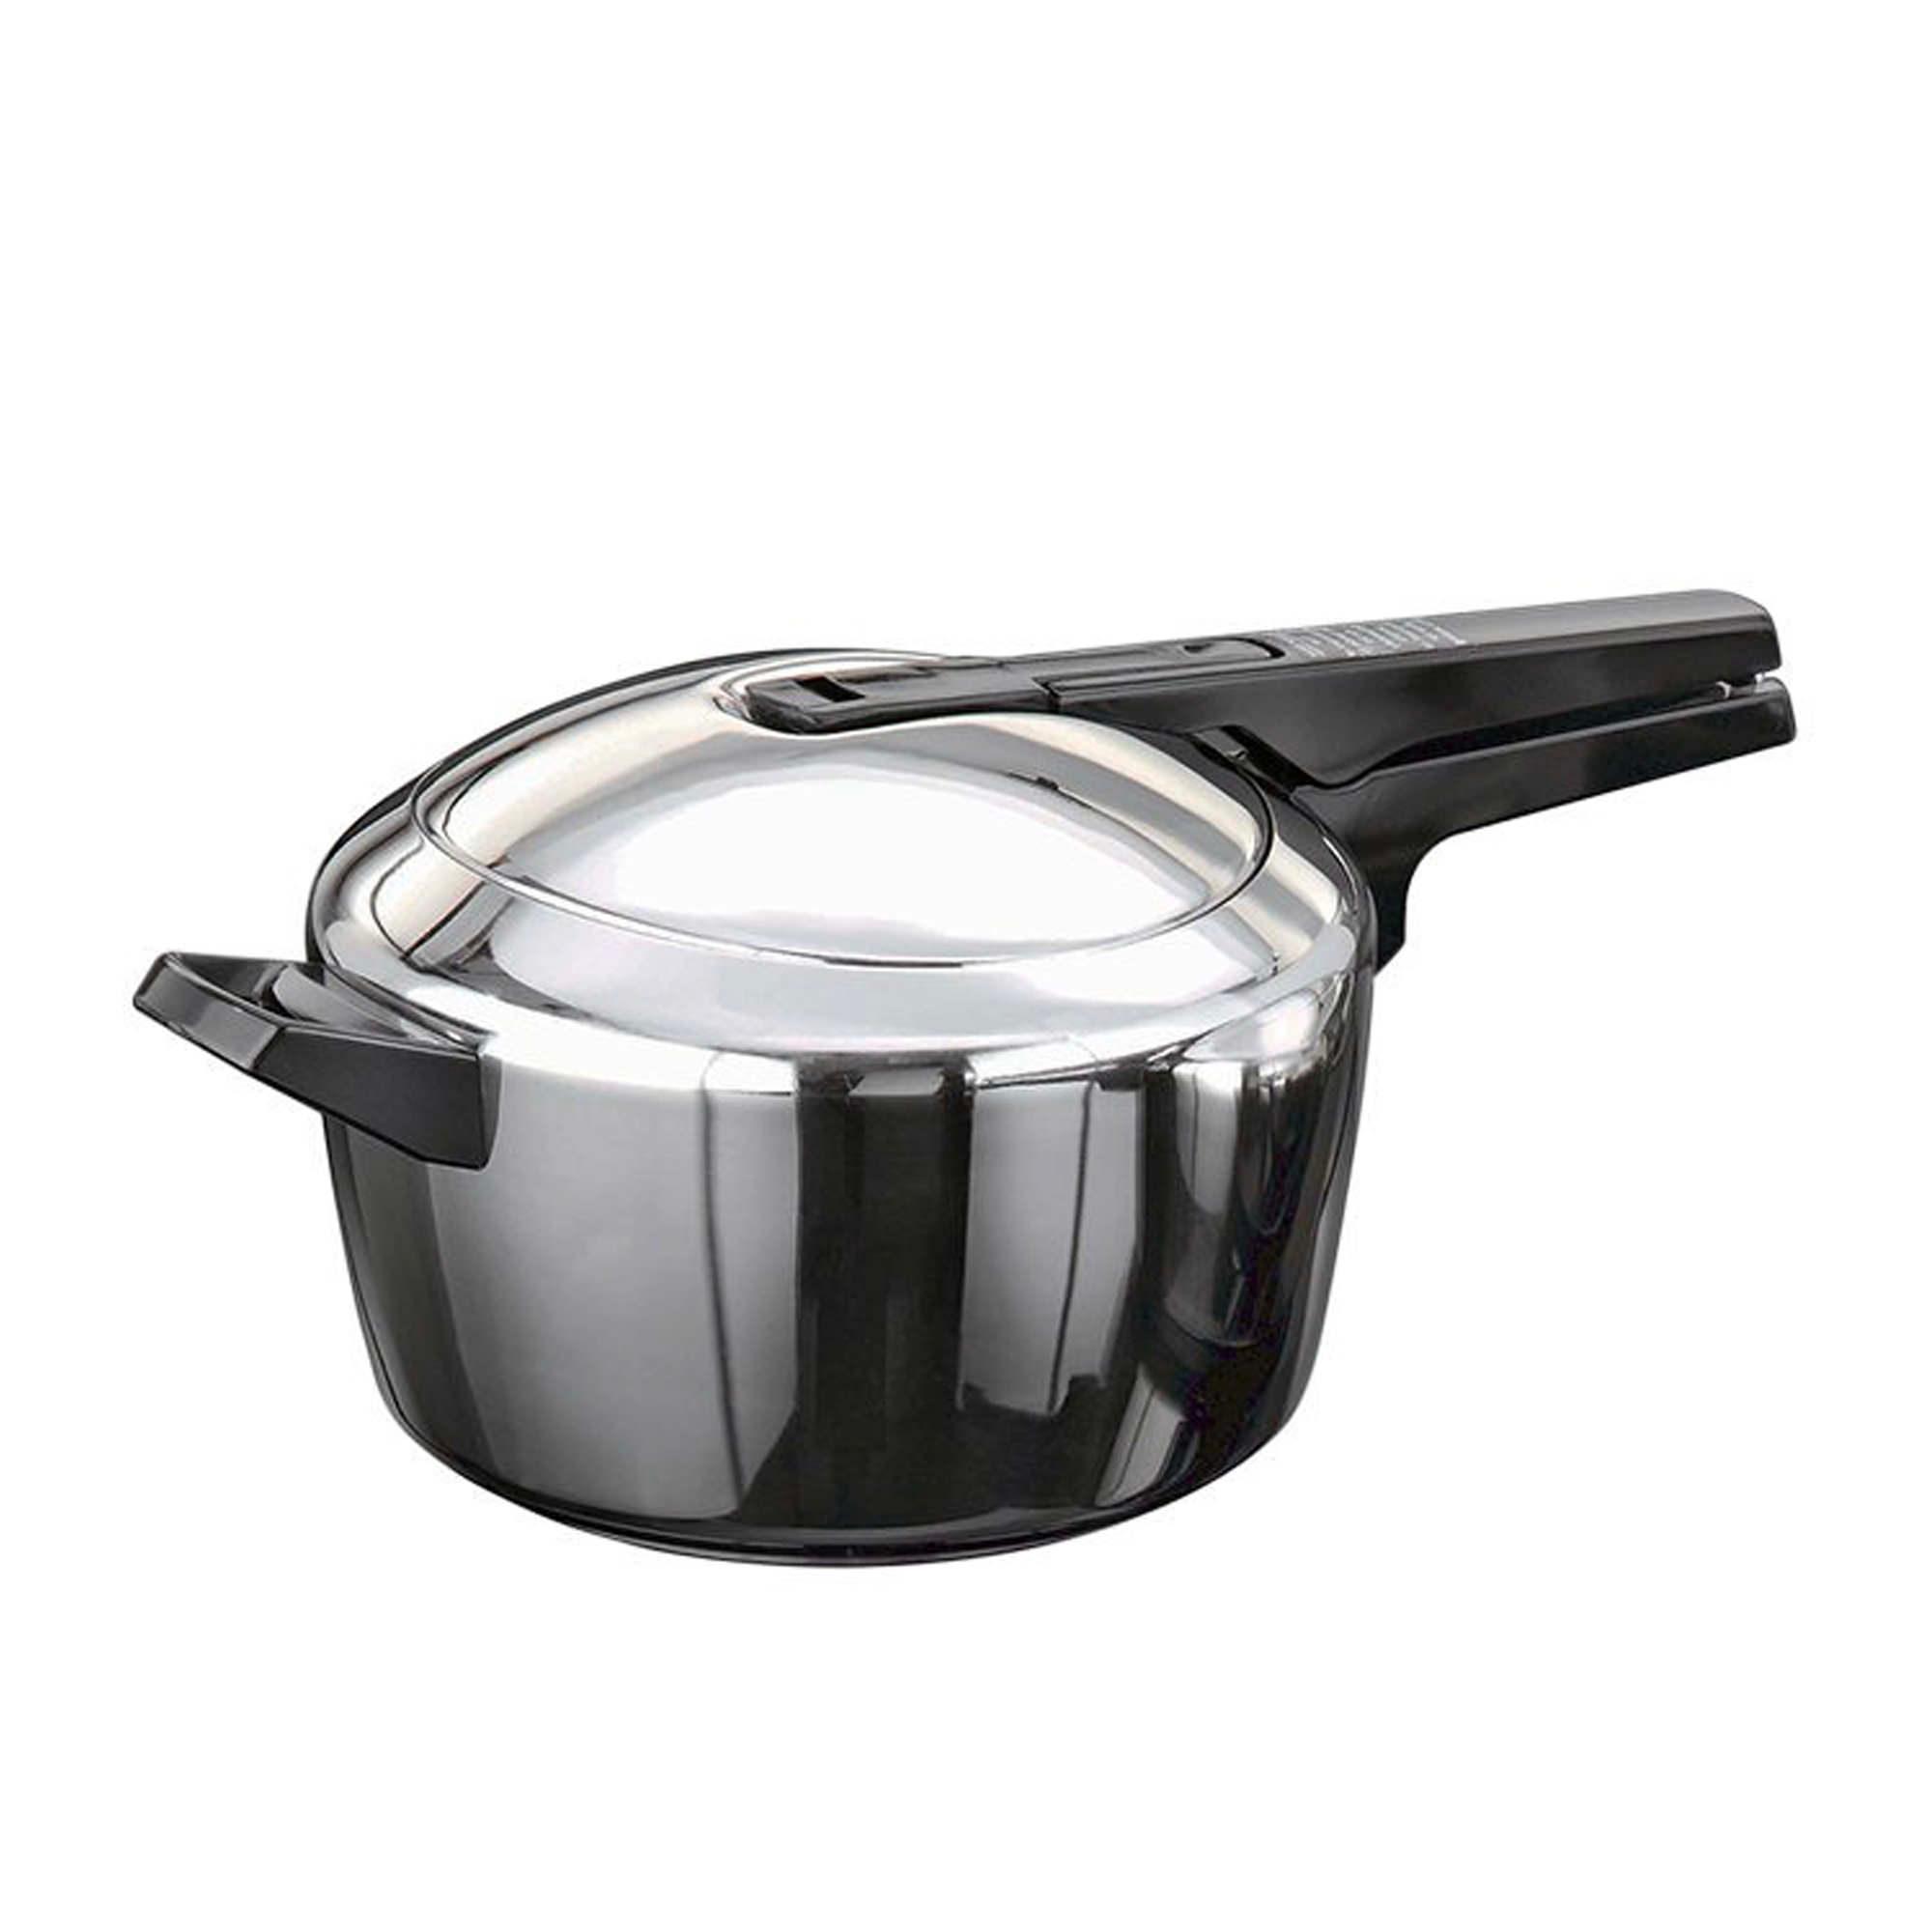 Futura Stainless Steel Pressure Cooker 5.5L | Warehouse™